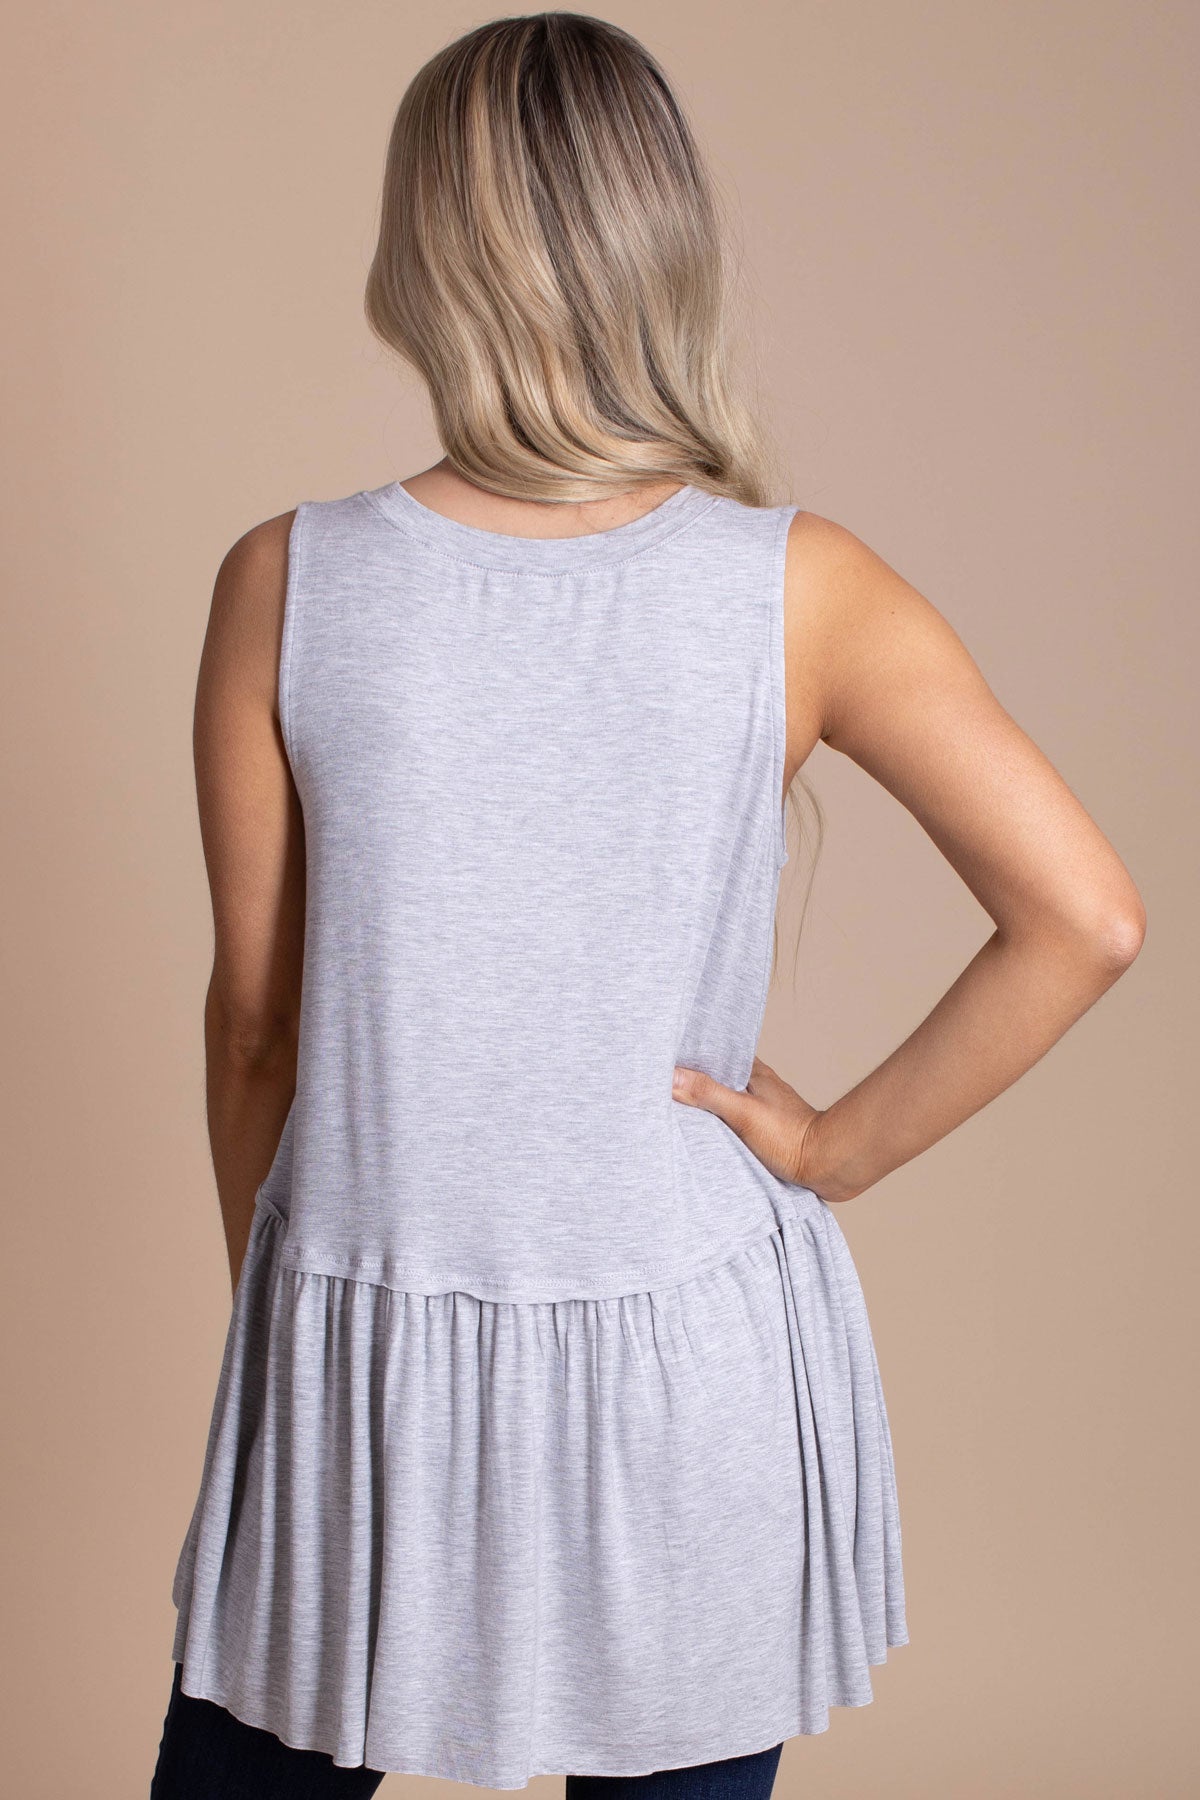 Boutique Heather Gray Top For Women